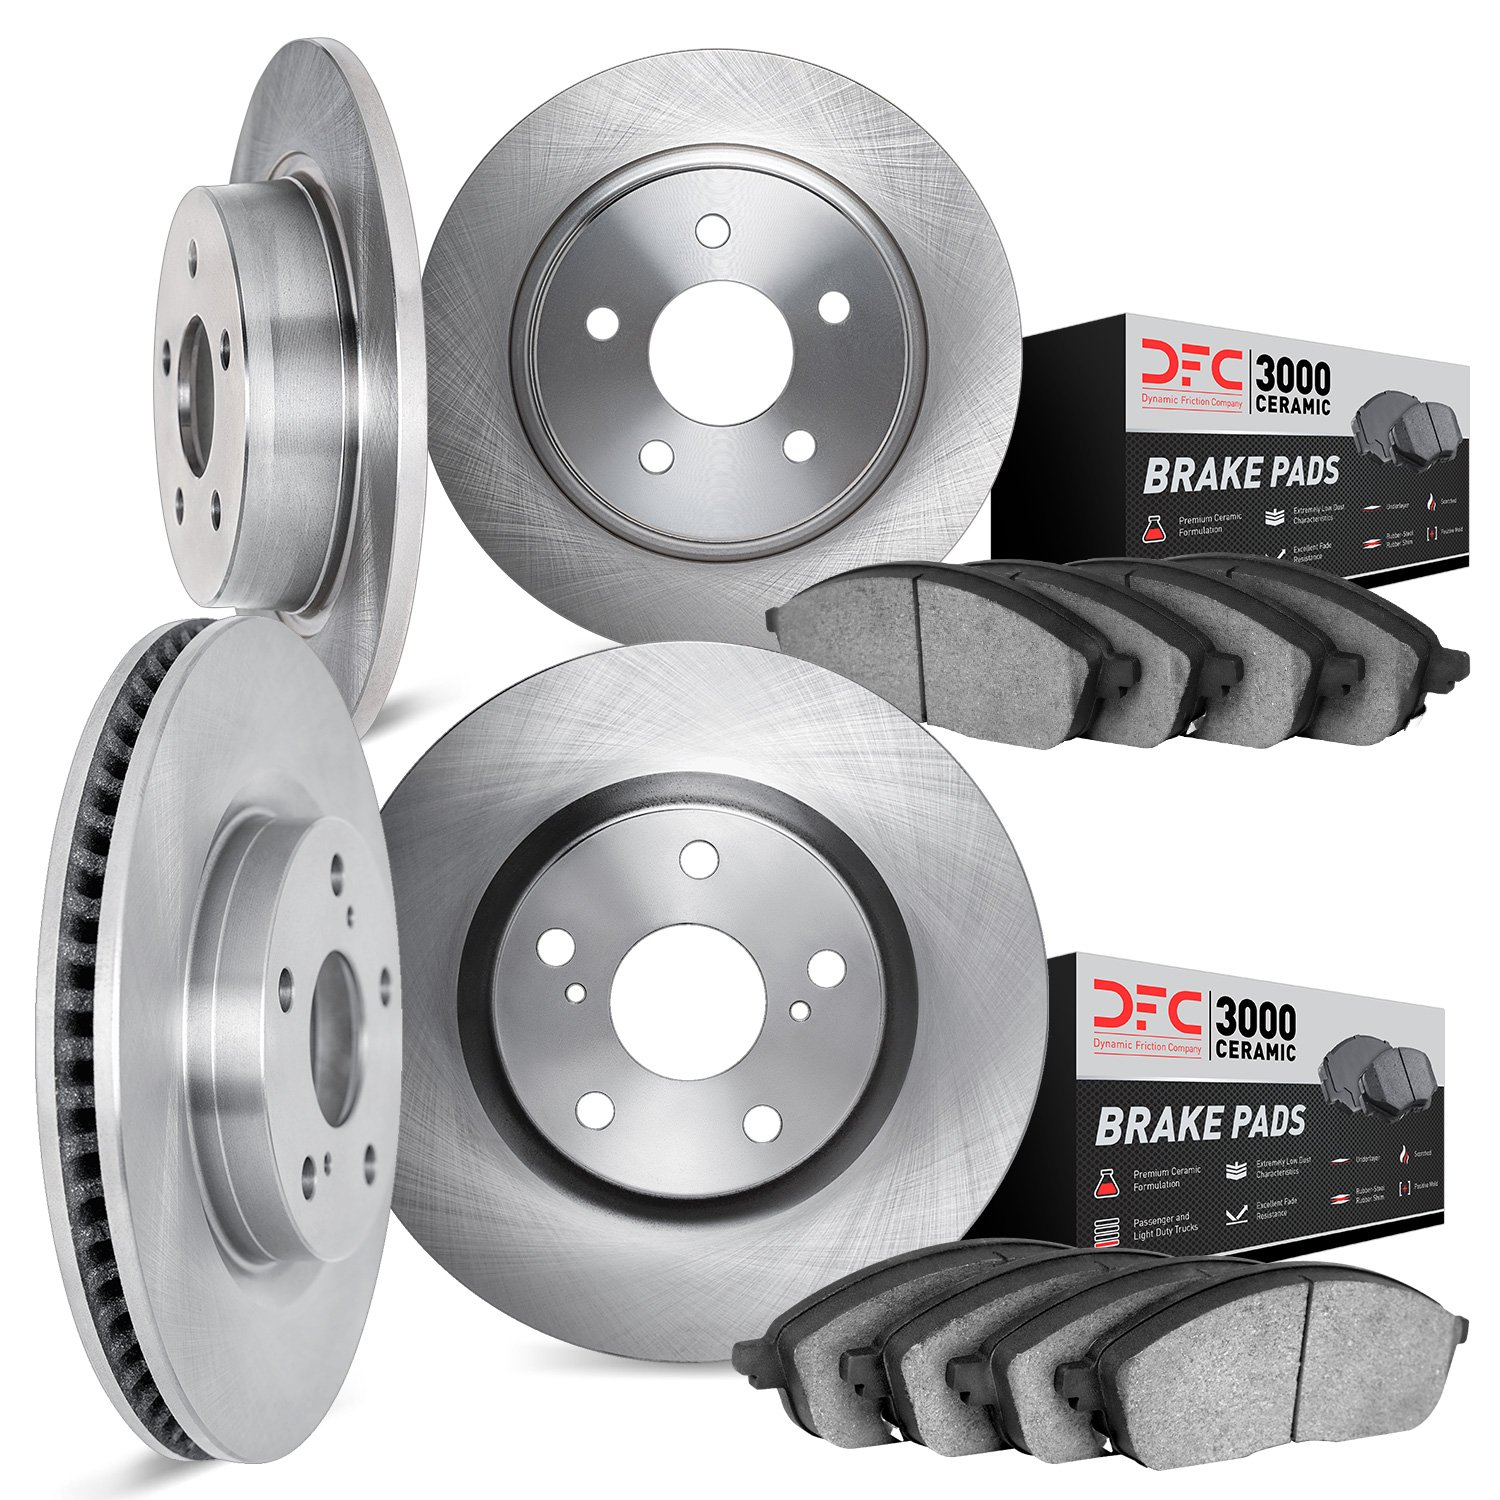 6304-76096 Brake Rotors with 3000-Series Ceramic Brake Pads Kit, 2009-2015 Lexus/Toyota/Scion, Position: Front and Rear